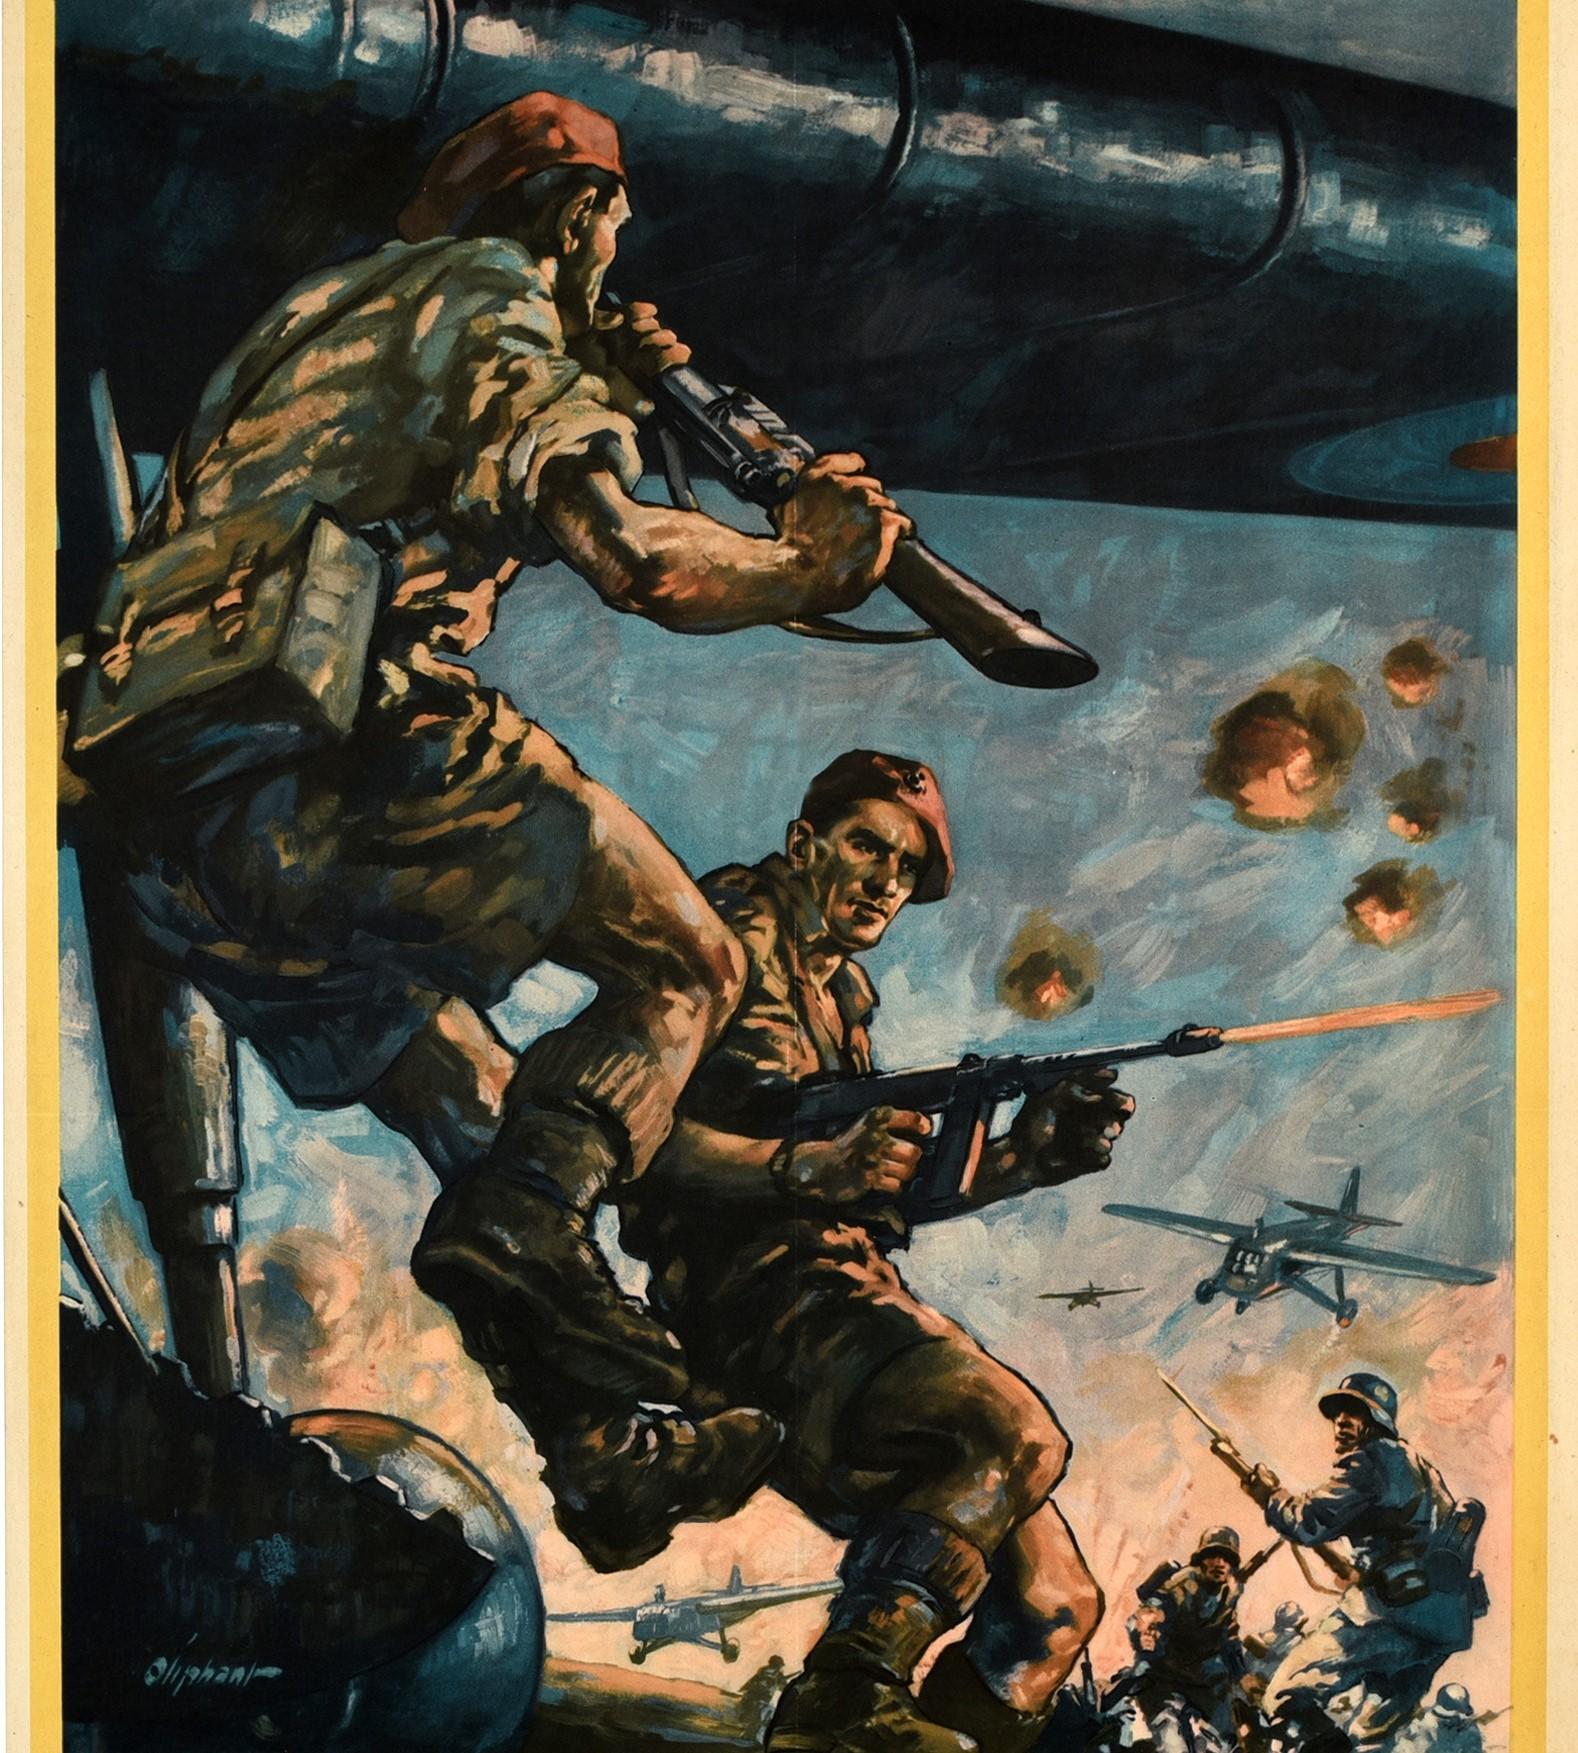 Original vintage World War Two propaganda poster - Back Them Up! Britain's new Airborne Army goes into action in Europe - featuring a dynamic battle scene depicting British soldiers in uniform wearing their maroon berets (the Red Berets of the